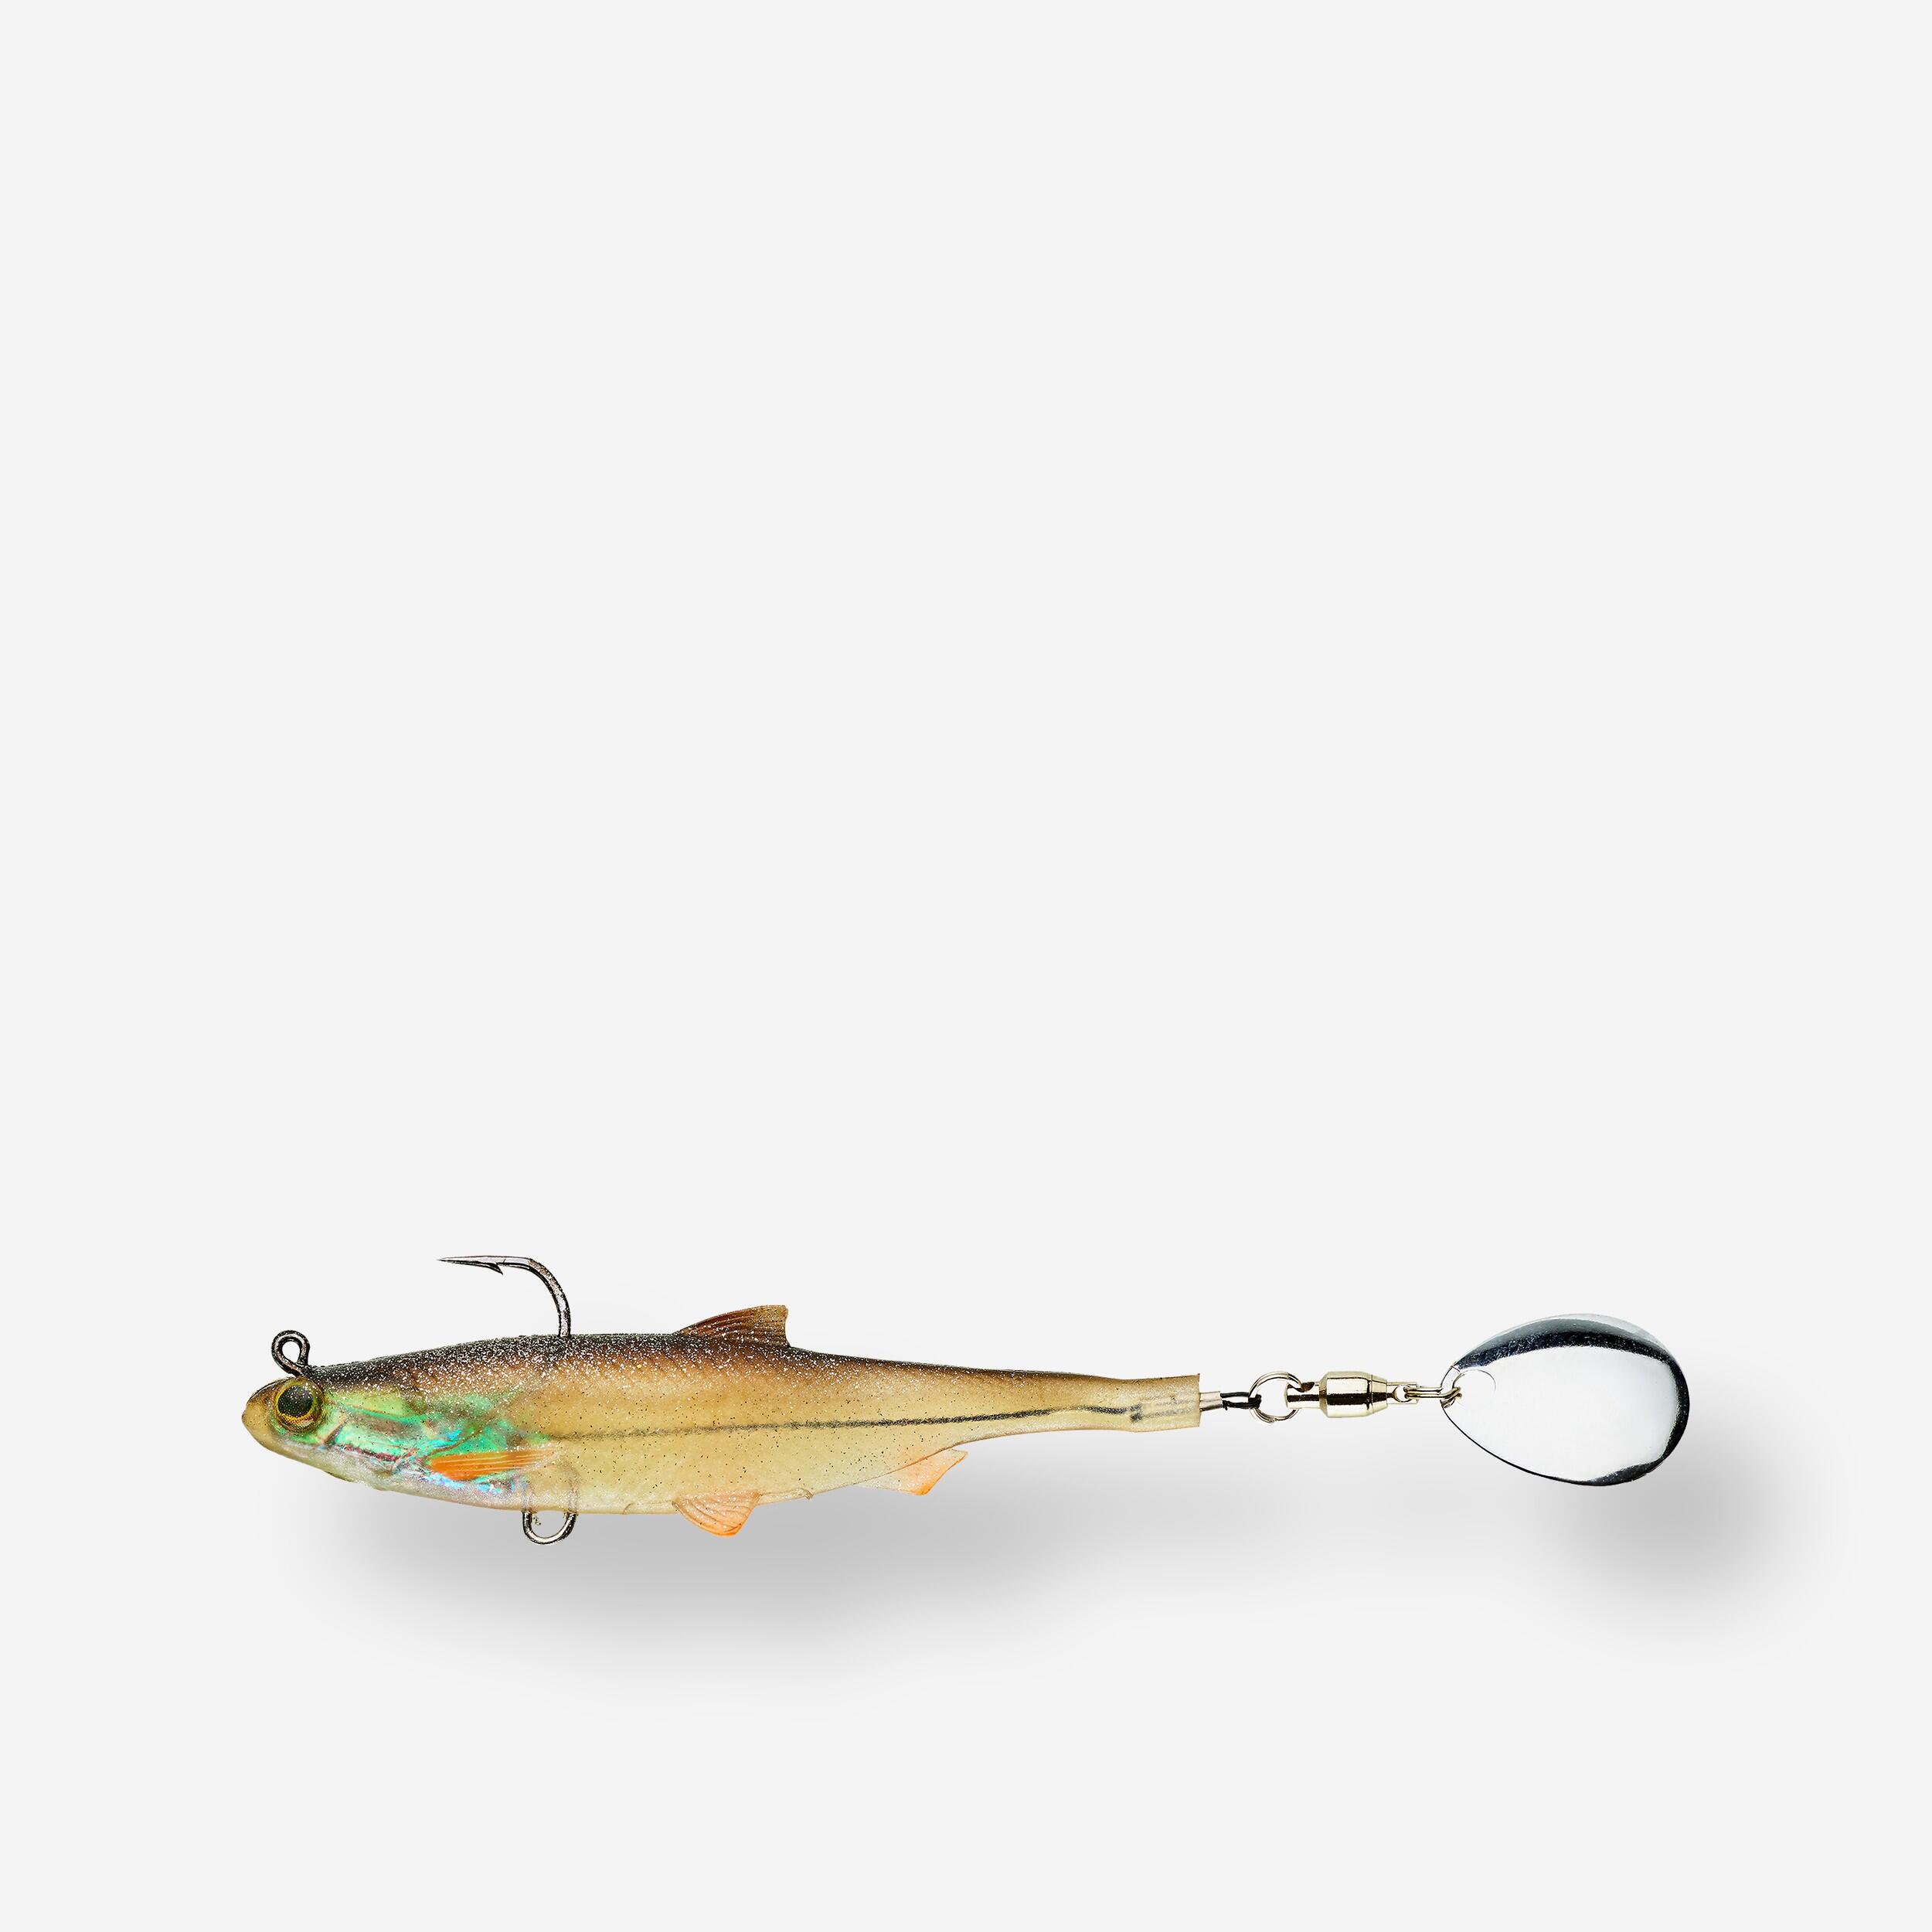 CAPERLAN LURE FISHING ROACHSPIN 70 ROACH BLADED SHAD SOFT LURE